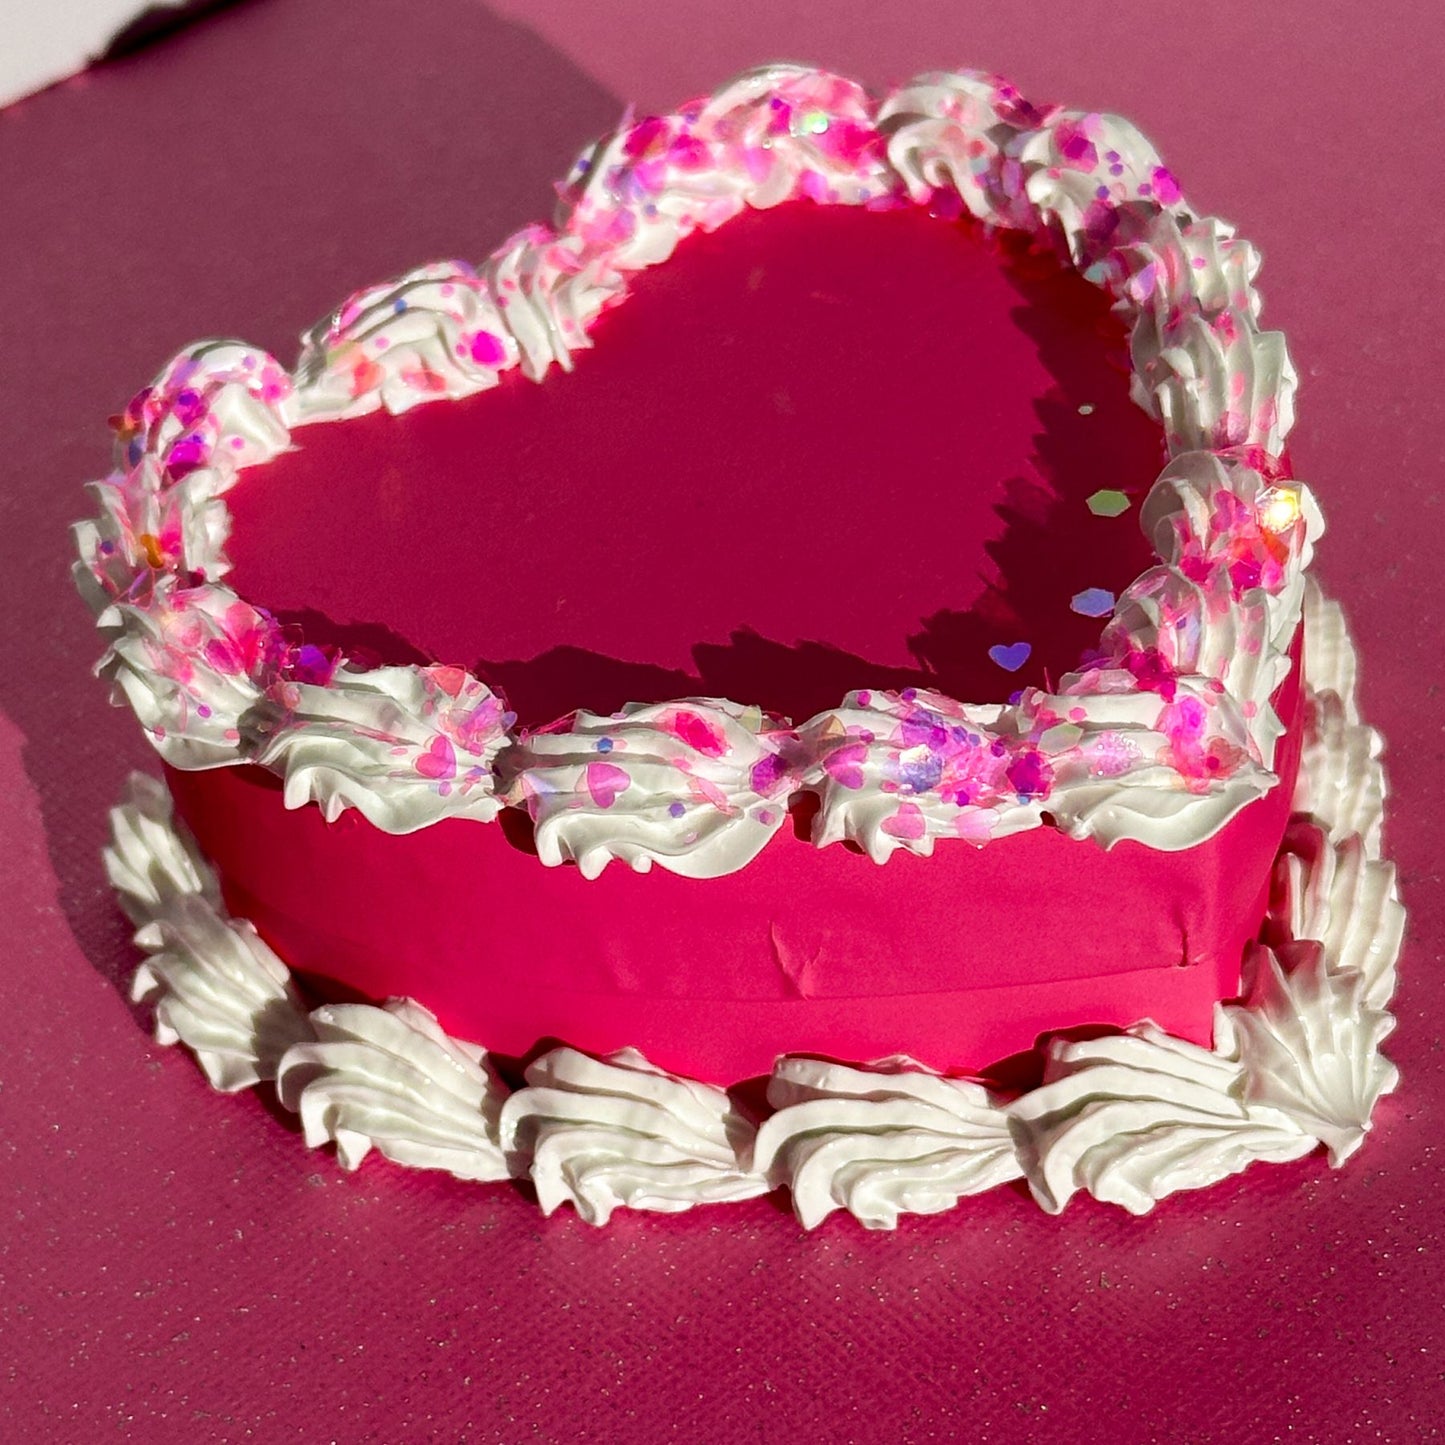 3D Painted Cake - Heart Box Pink With Pink Glitter